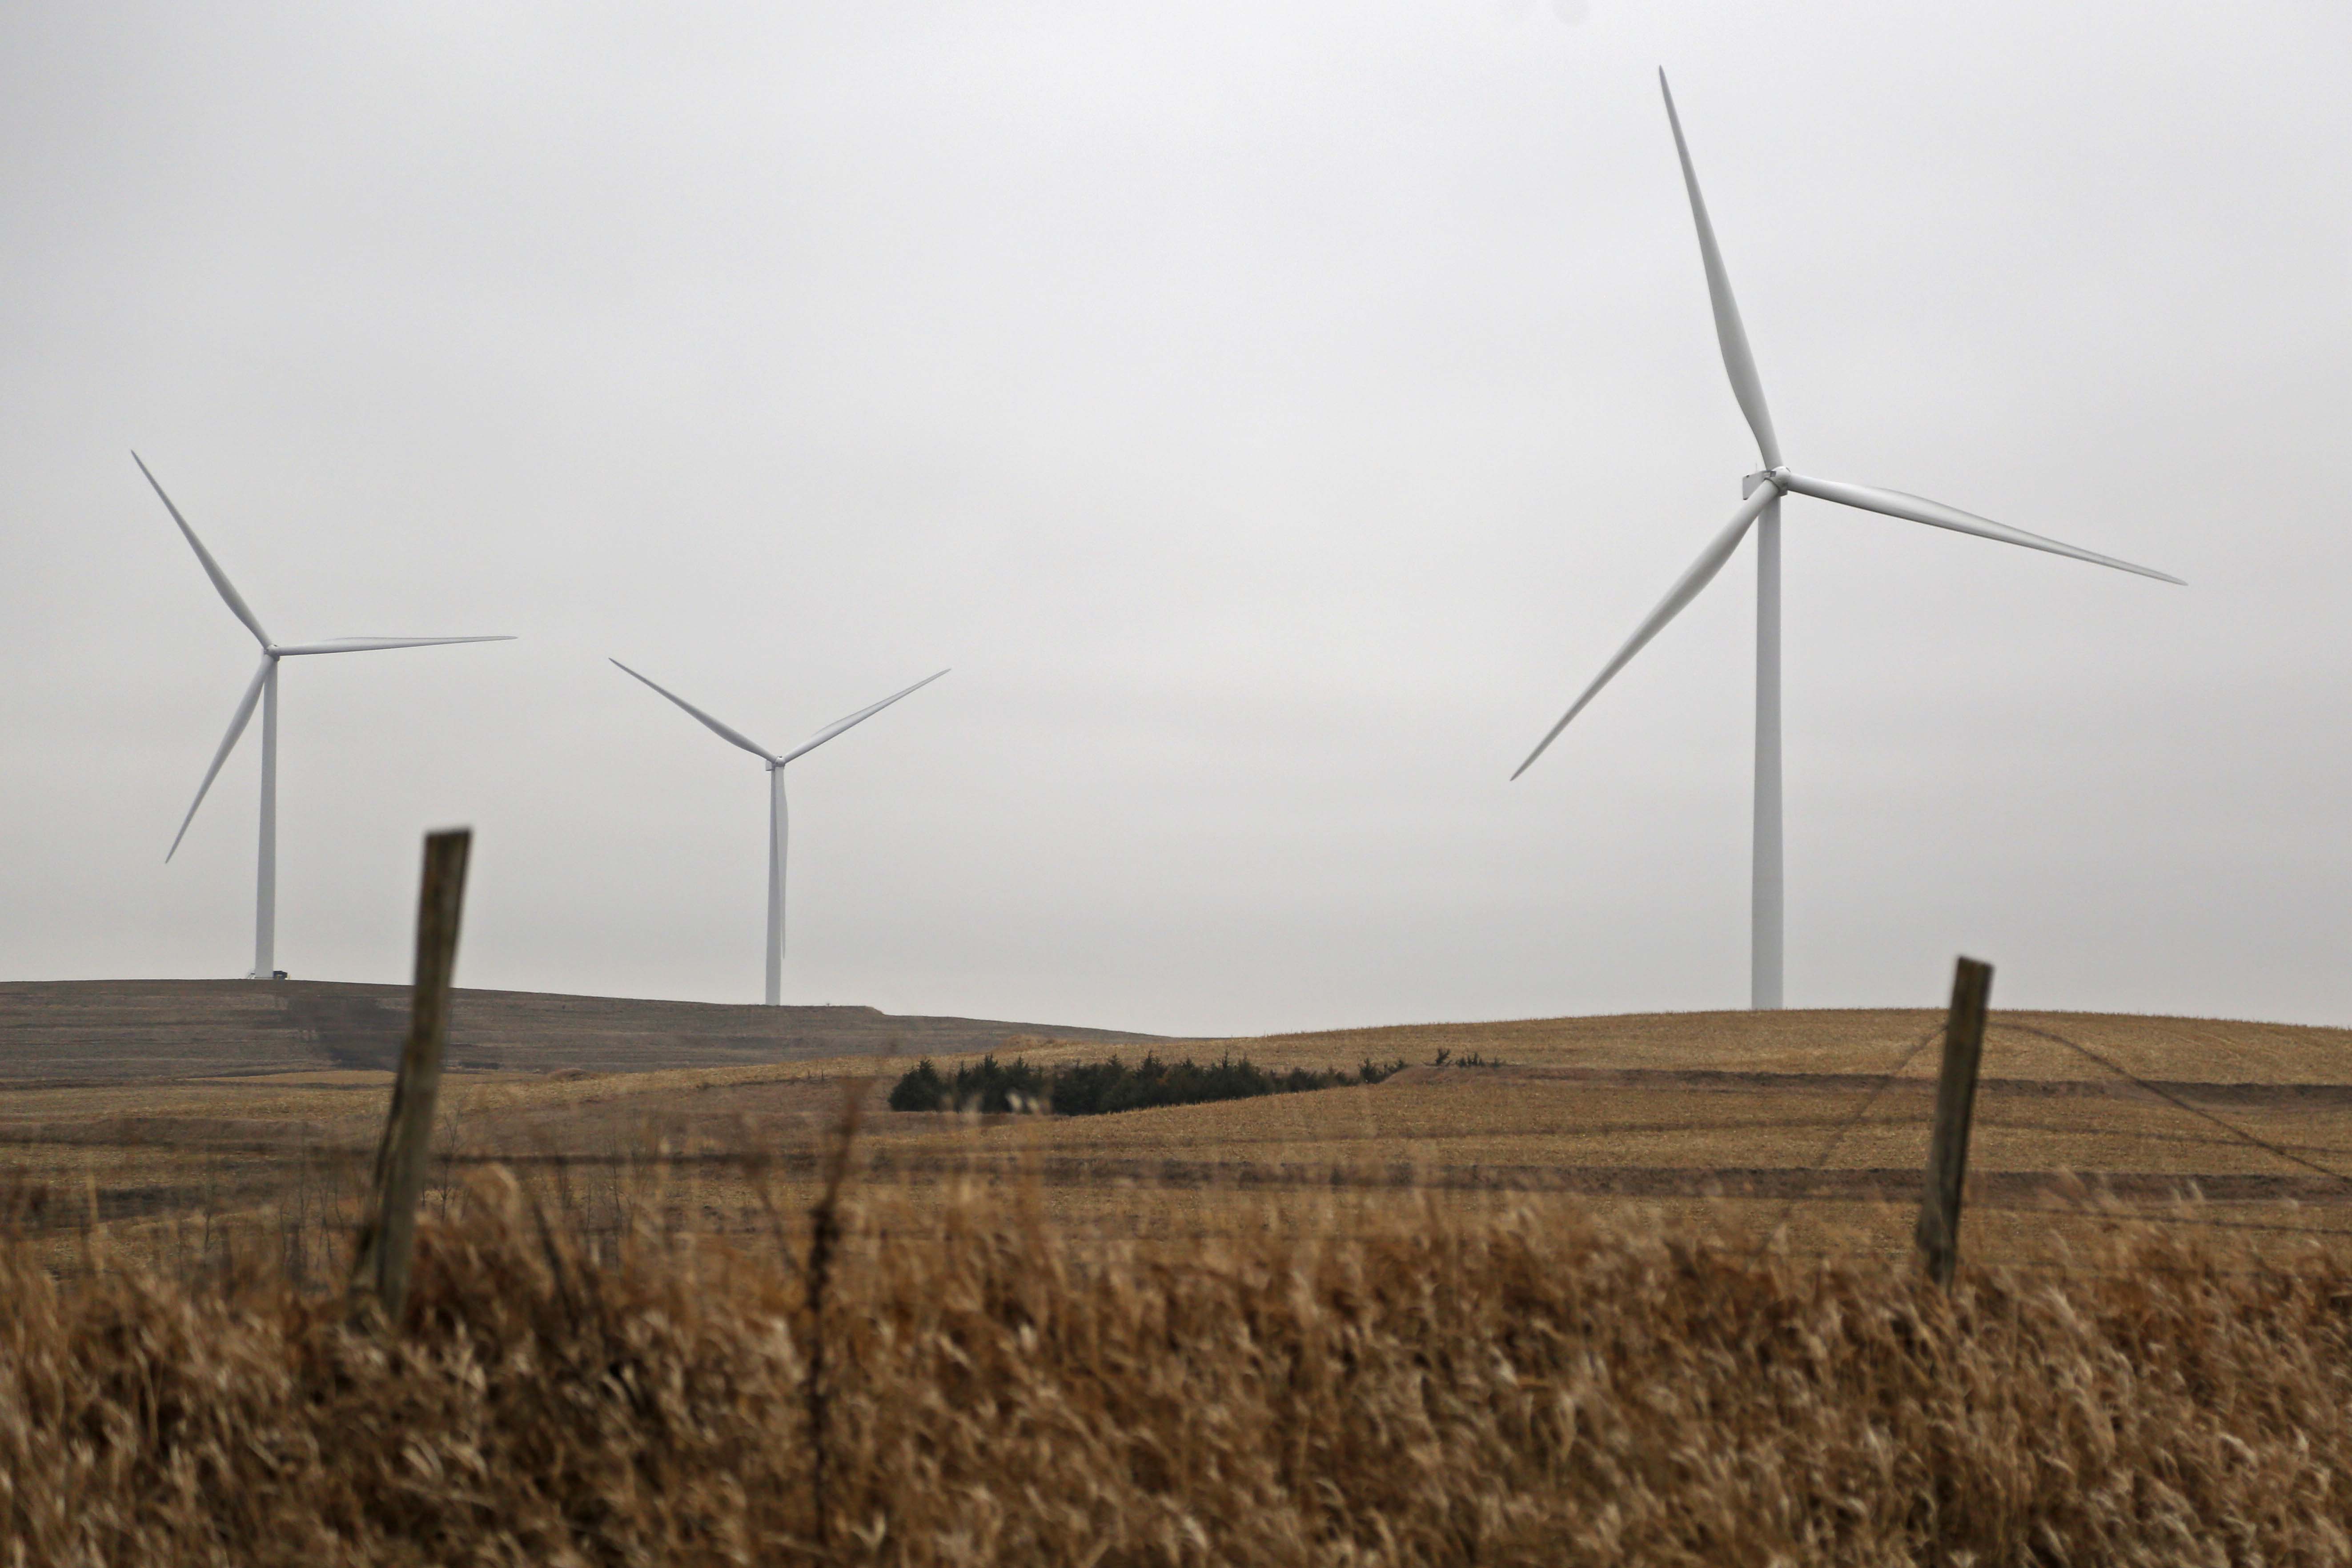 Experts: Iowa's renewable energy growth depends on better transmission